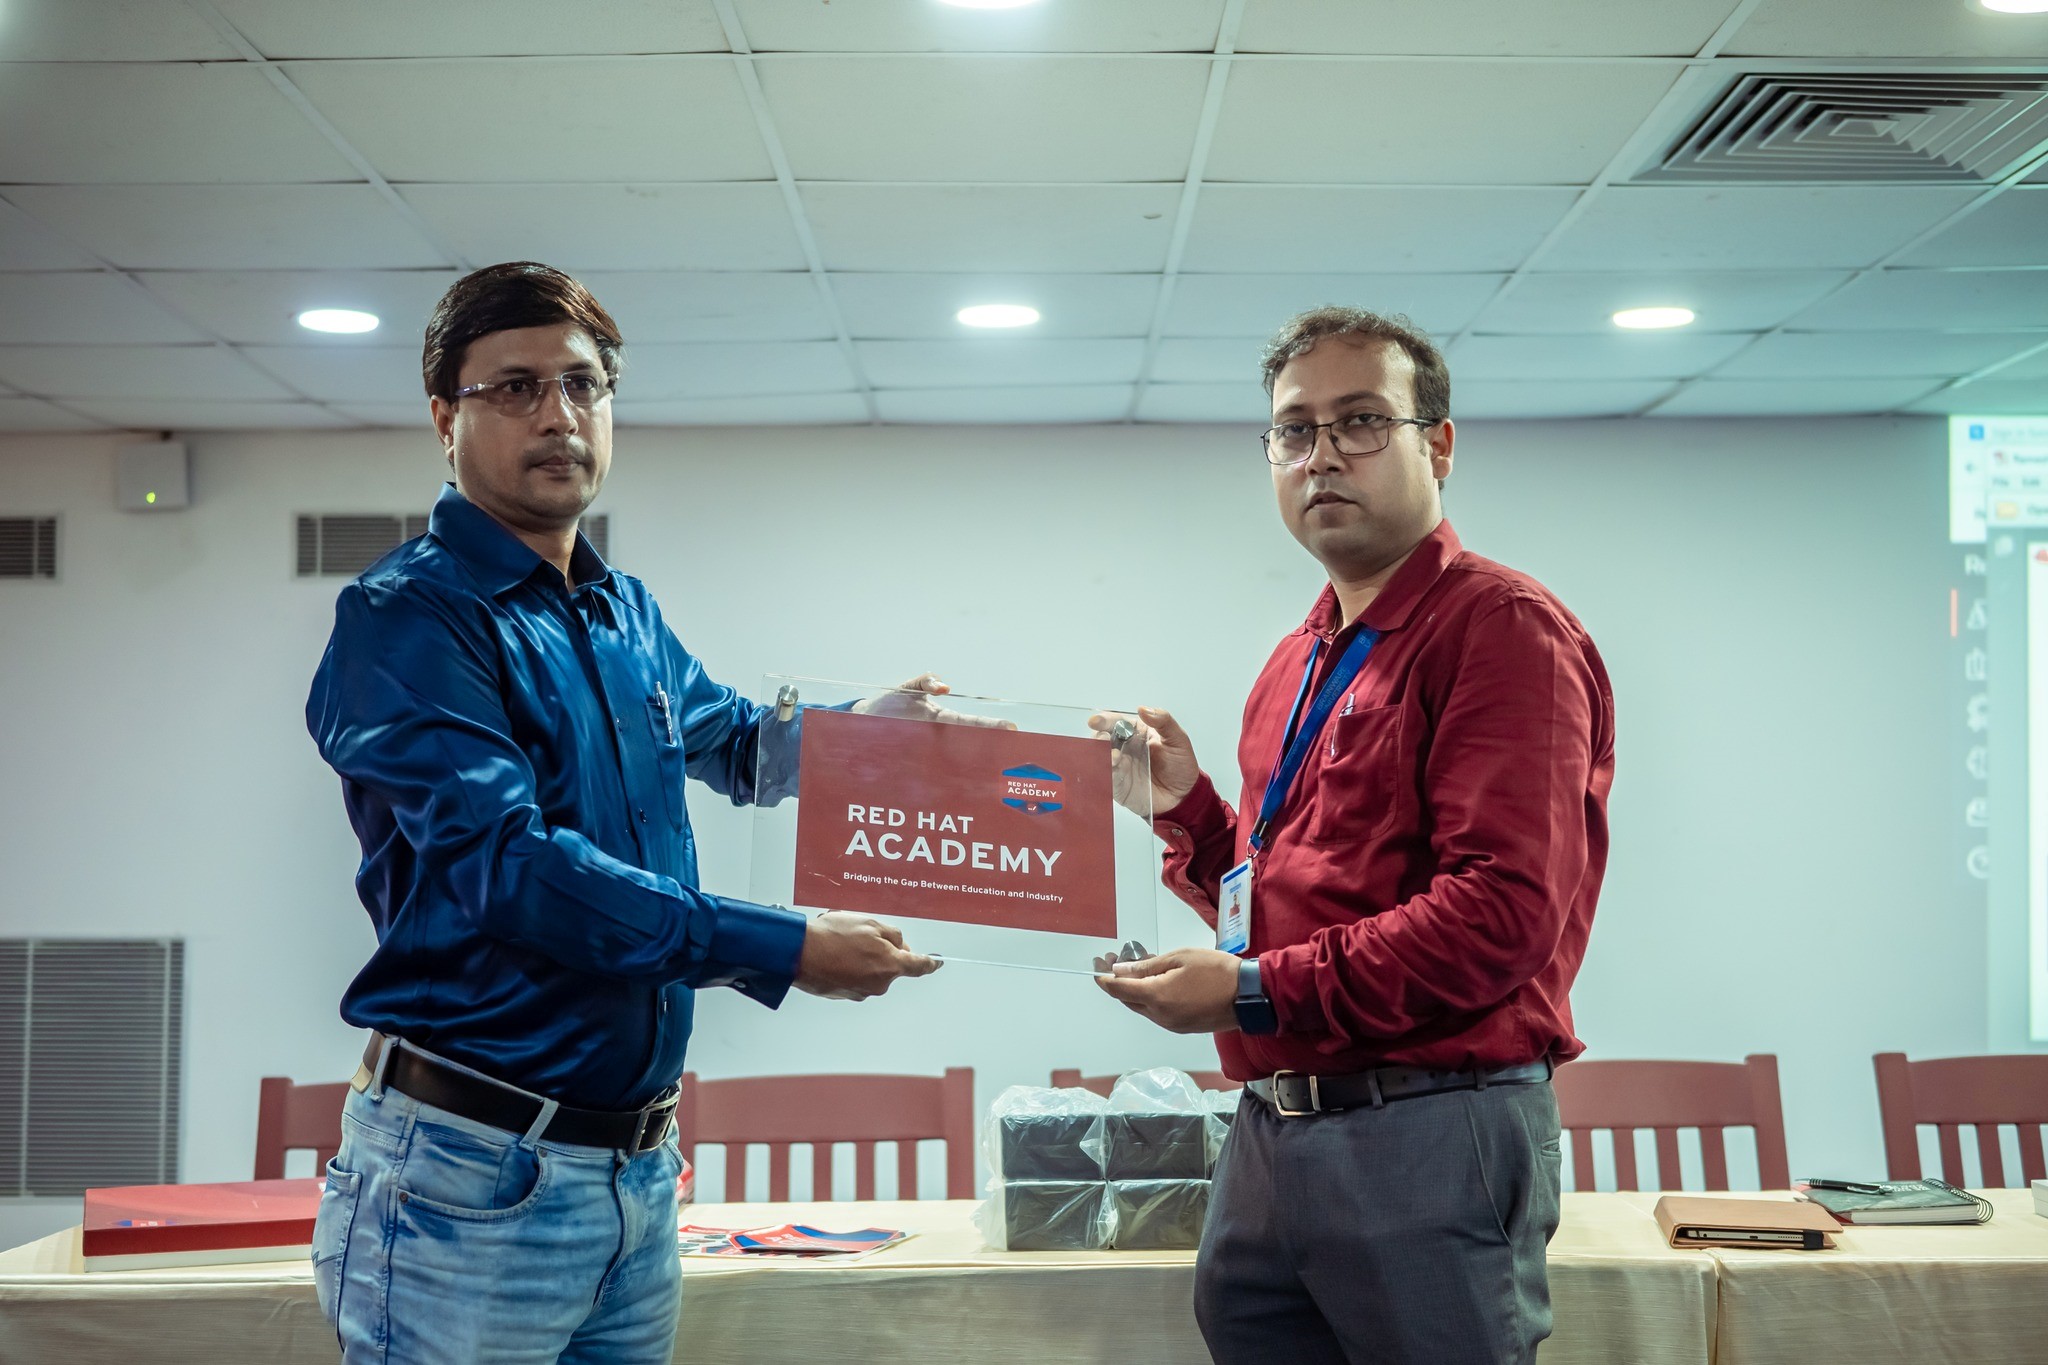 A seminar on 'Modern Trends in Linux Administration' in collaboration with Red Hat